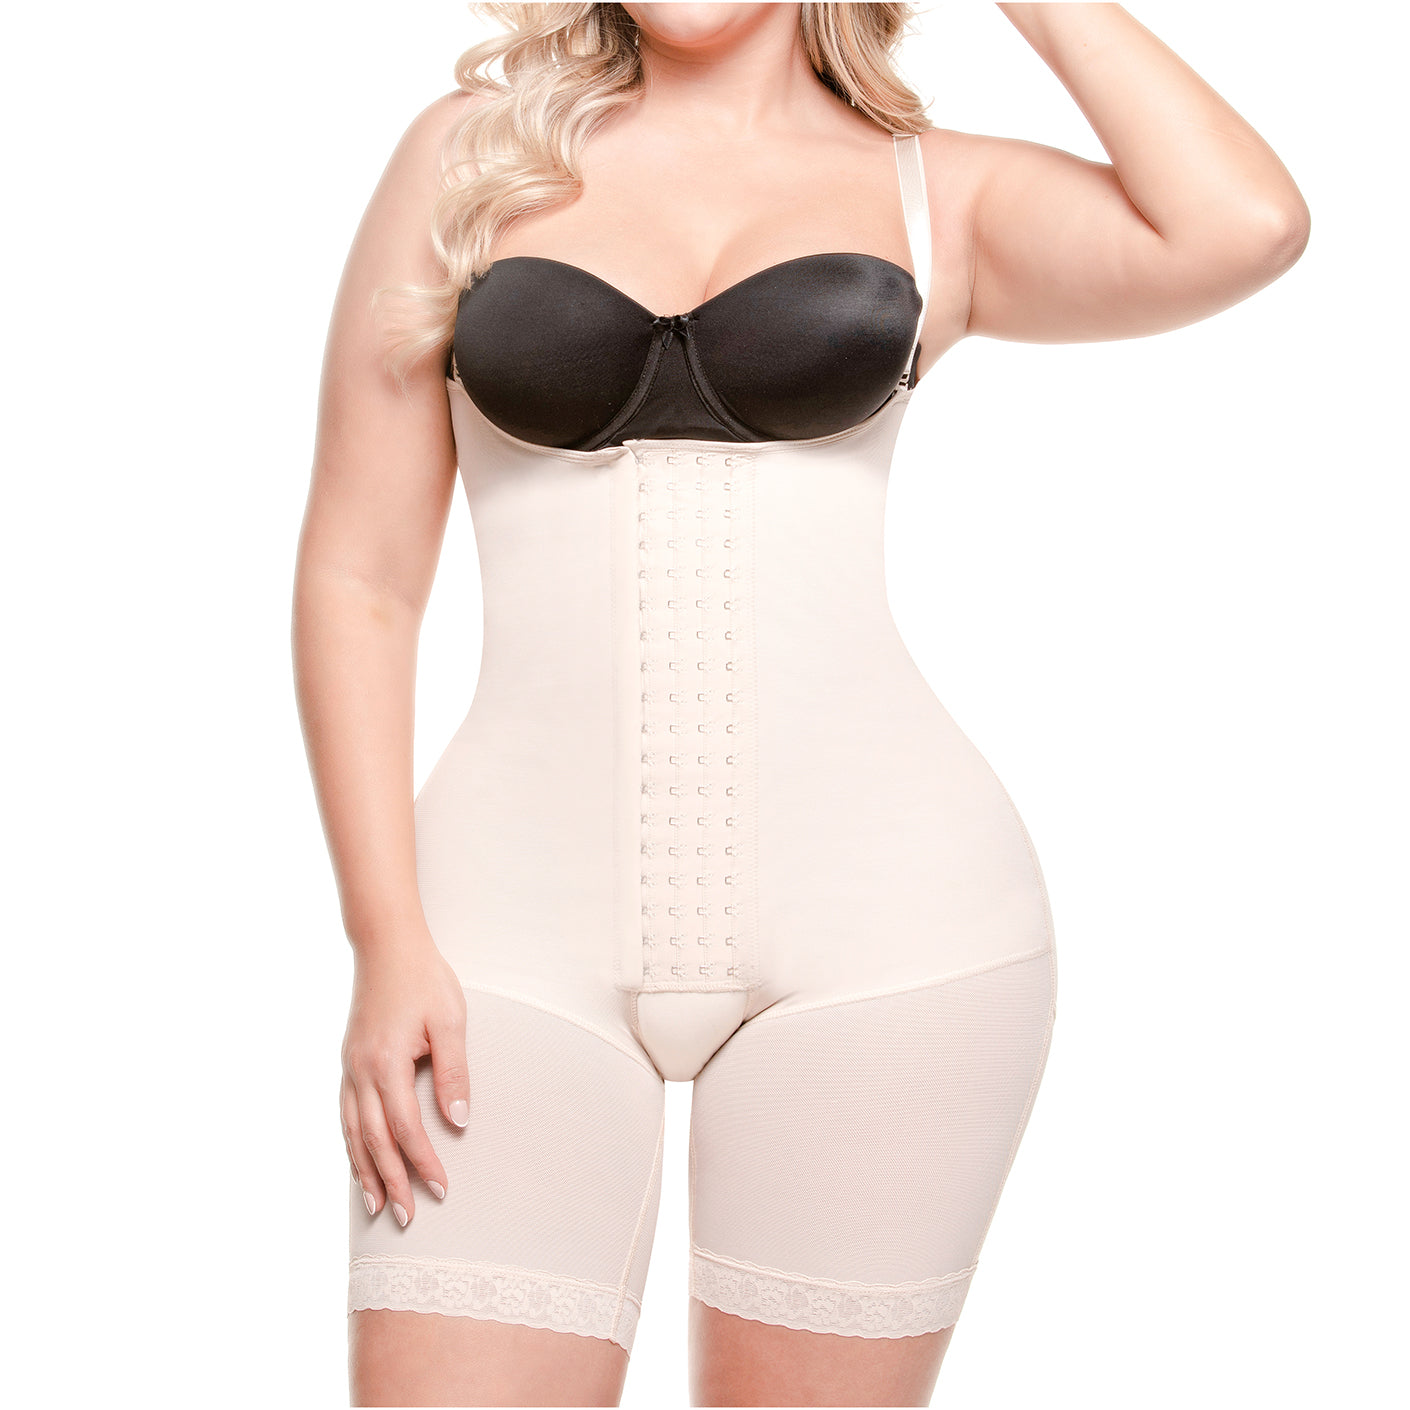 Shop Generic Plus Size Fajas Colombianas Post ry Compression